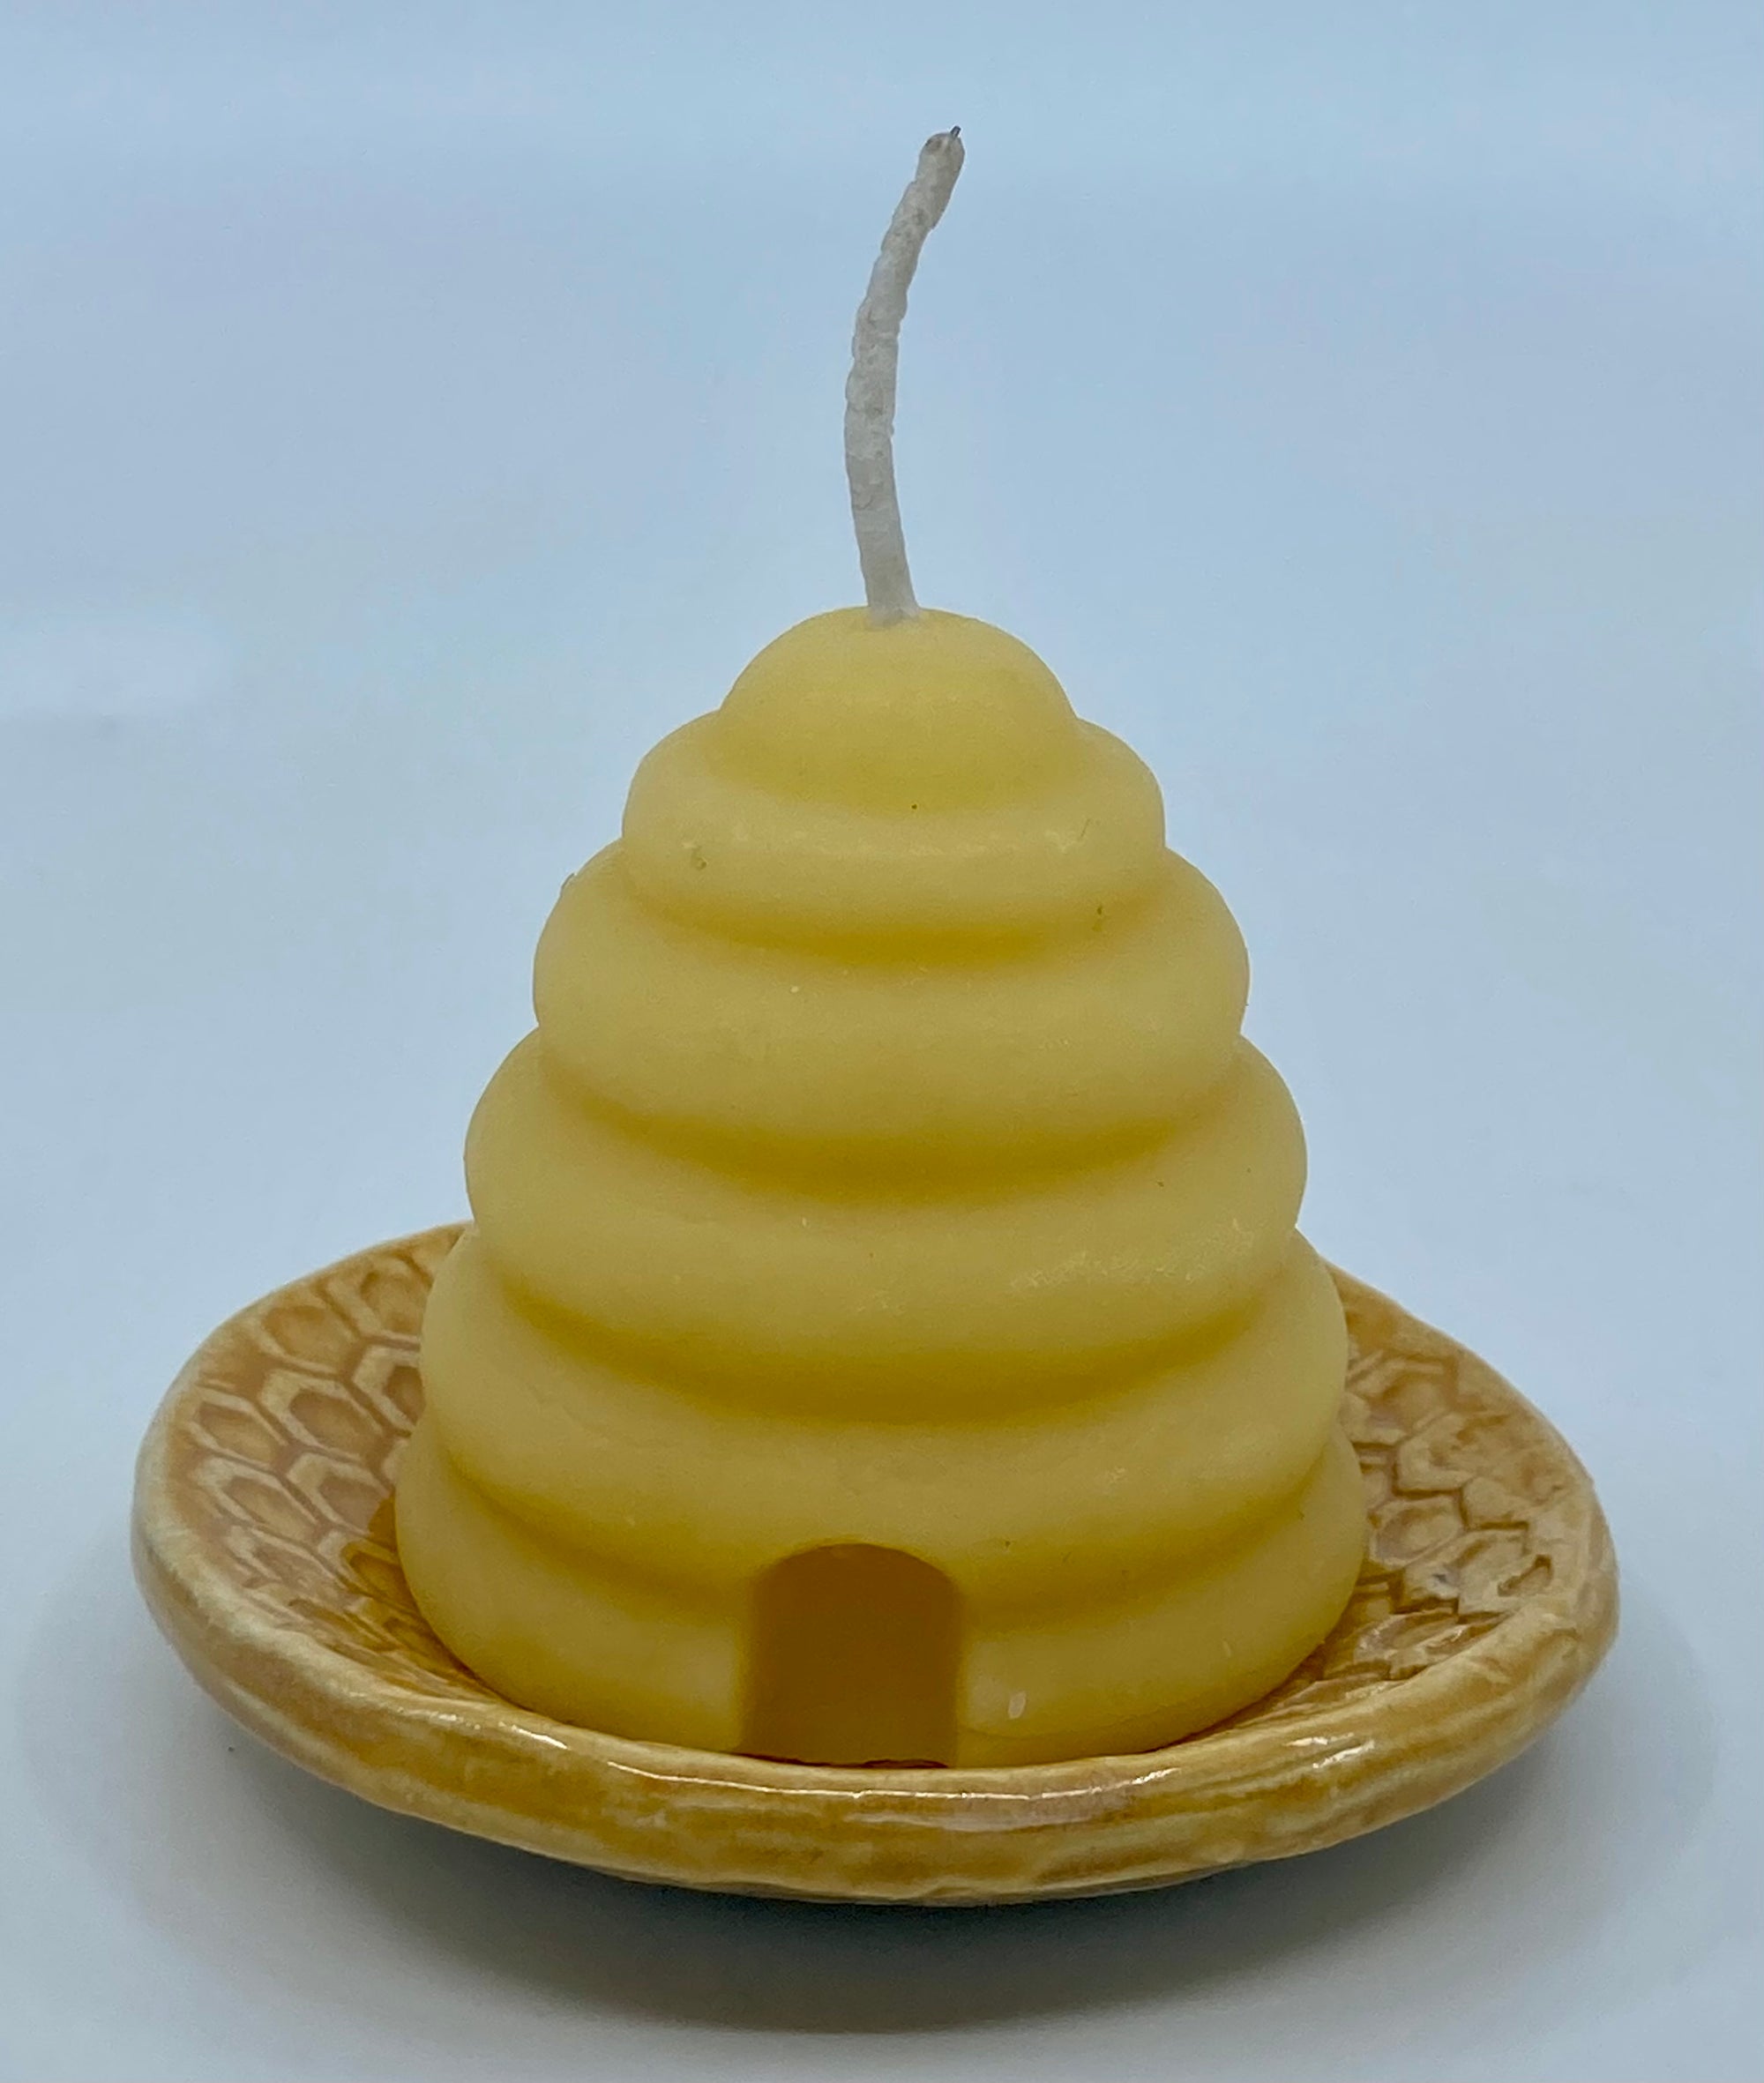 Beeswax candle in the shape of an old fashioned bee hive, which is also known as a skep.  The candle is sitting on a small ceramic dish with a honeycomb pattern on it.